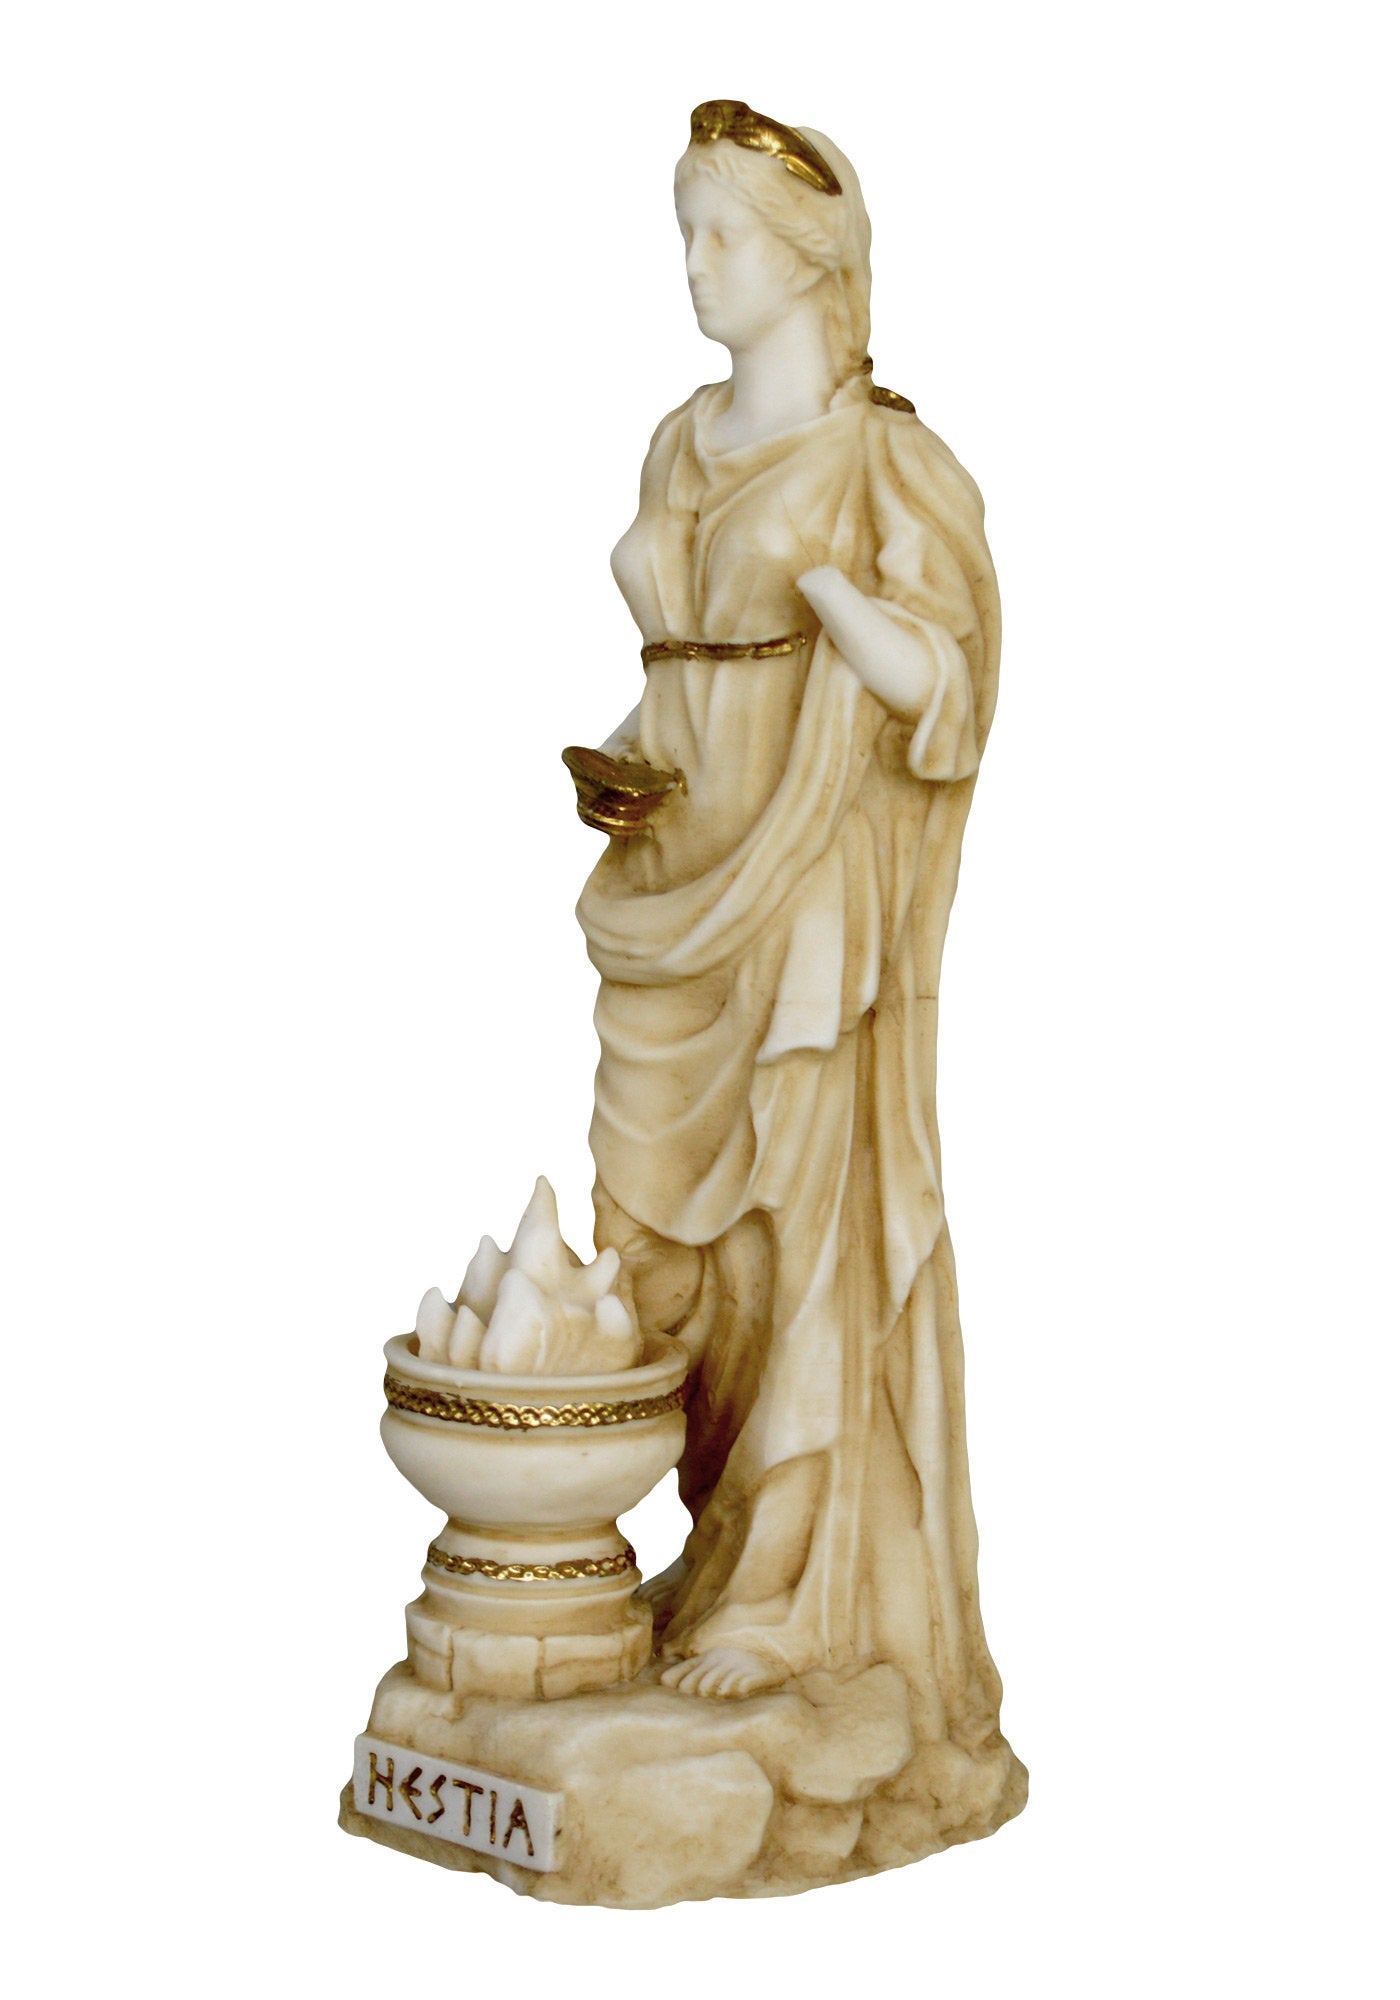 Hestia Vesta - Greek Roman Goddess of Hearth, Right Ordering of Domesticity, Family, Home and the State - Aged Alabaster Statue